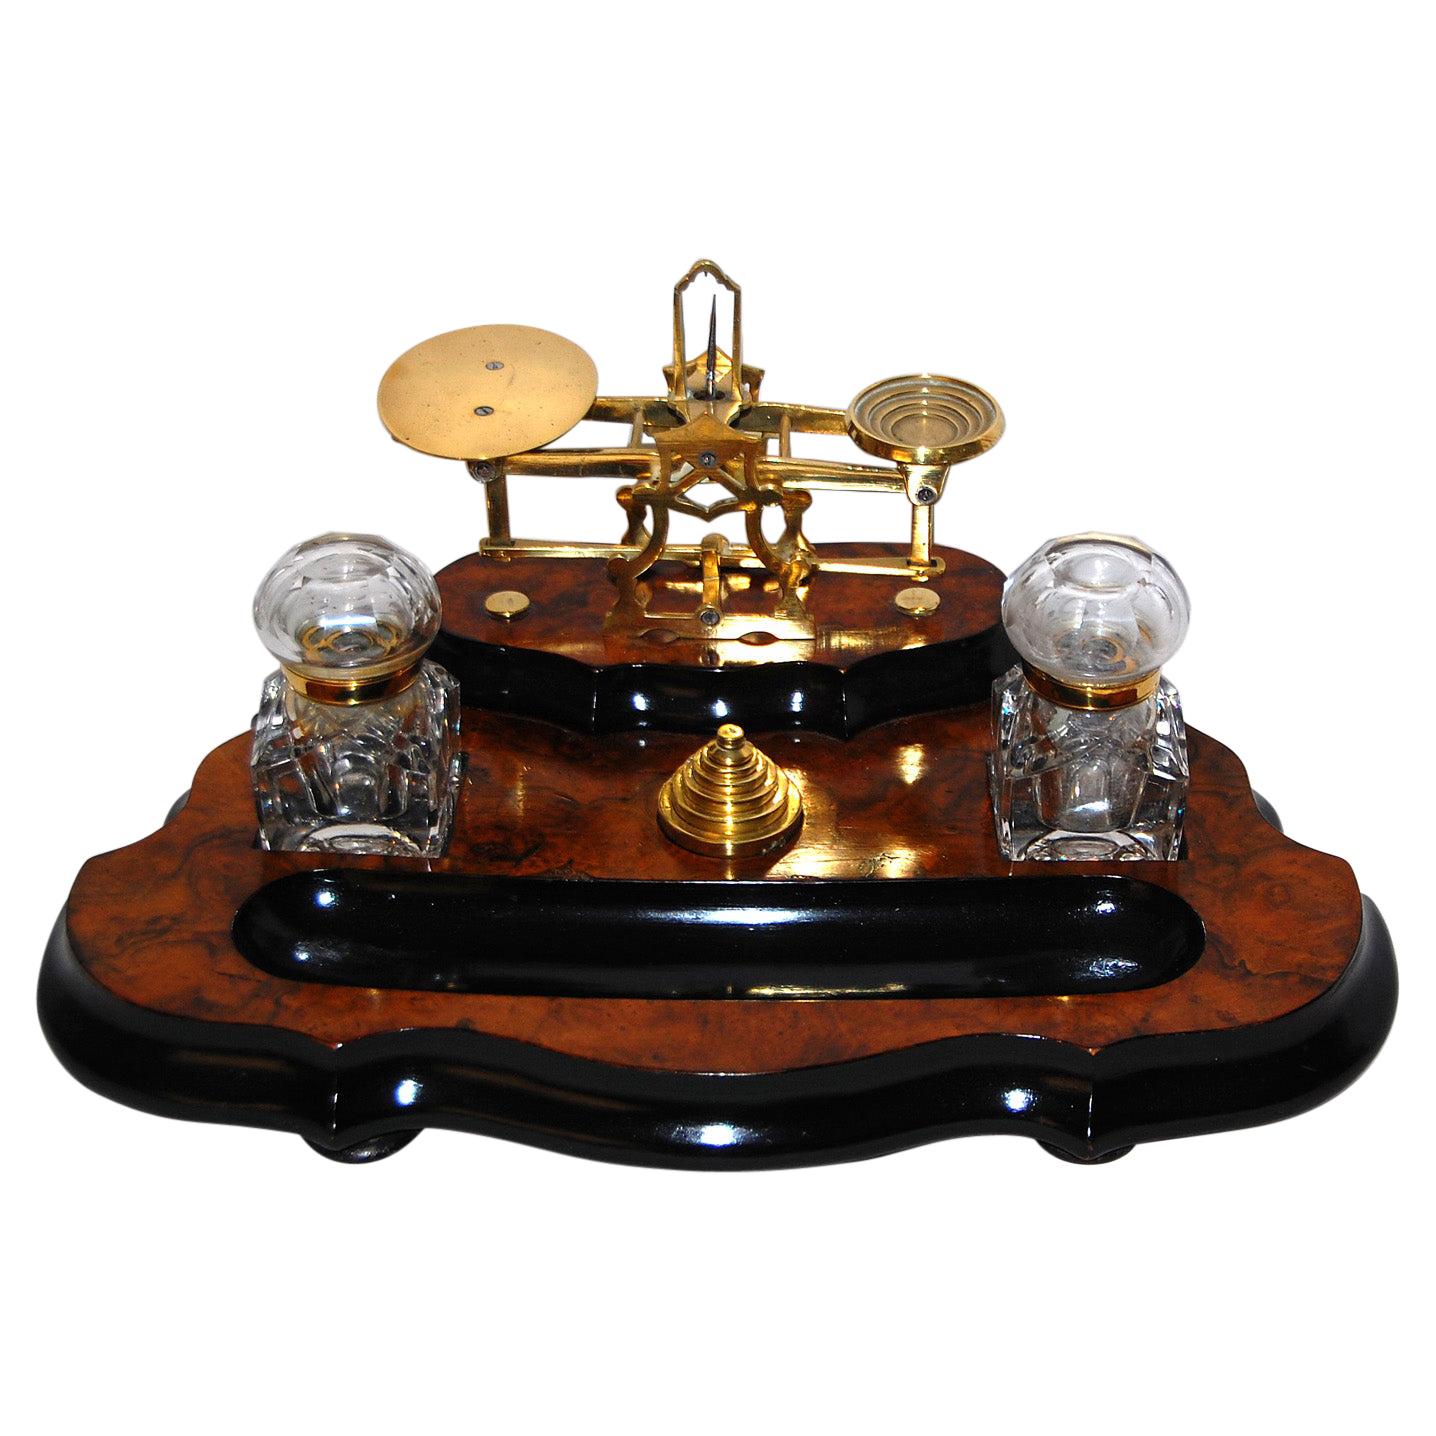 English Mid 19th Century Burl Walnut Double Inkstand, Postal Scale and Pen Rest